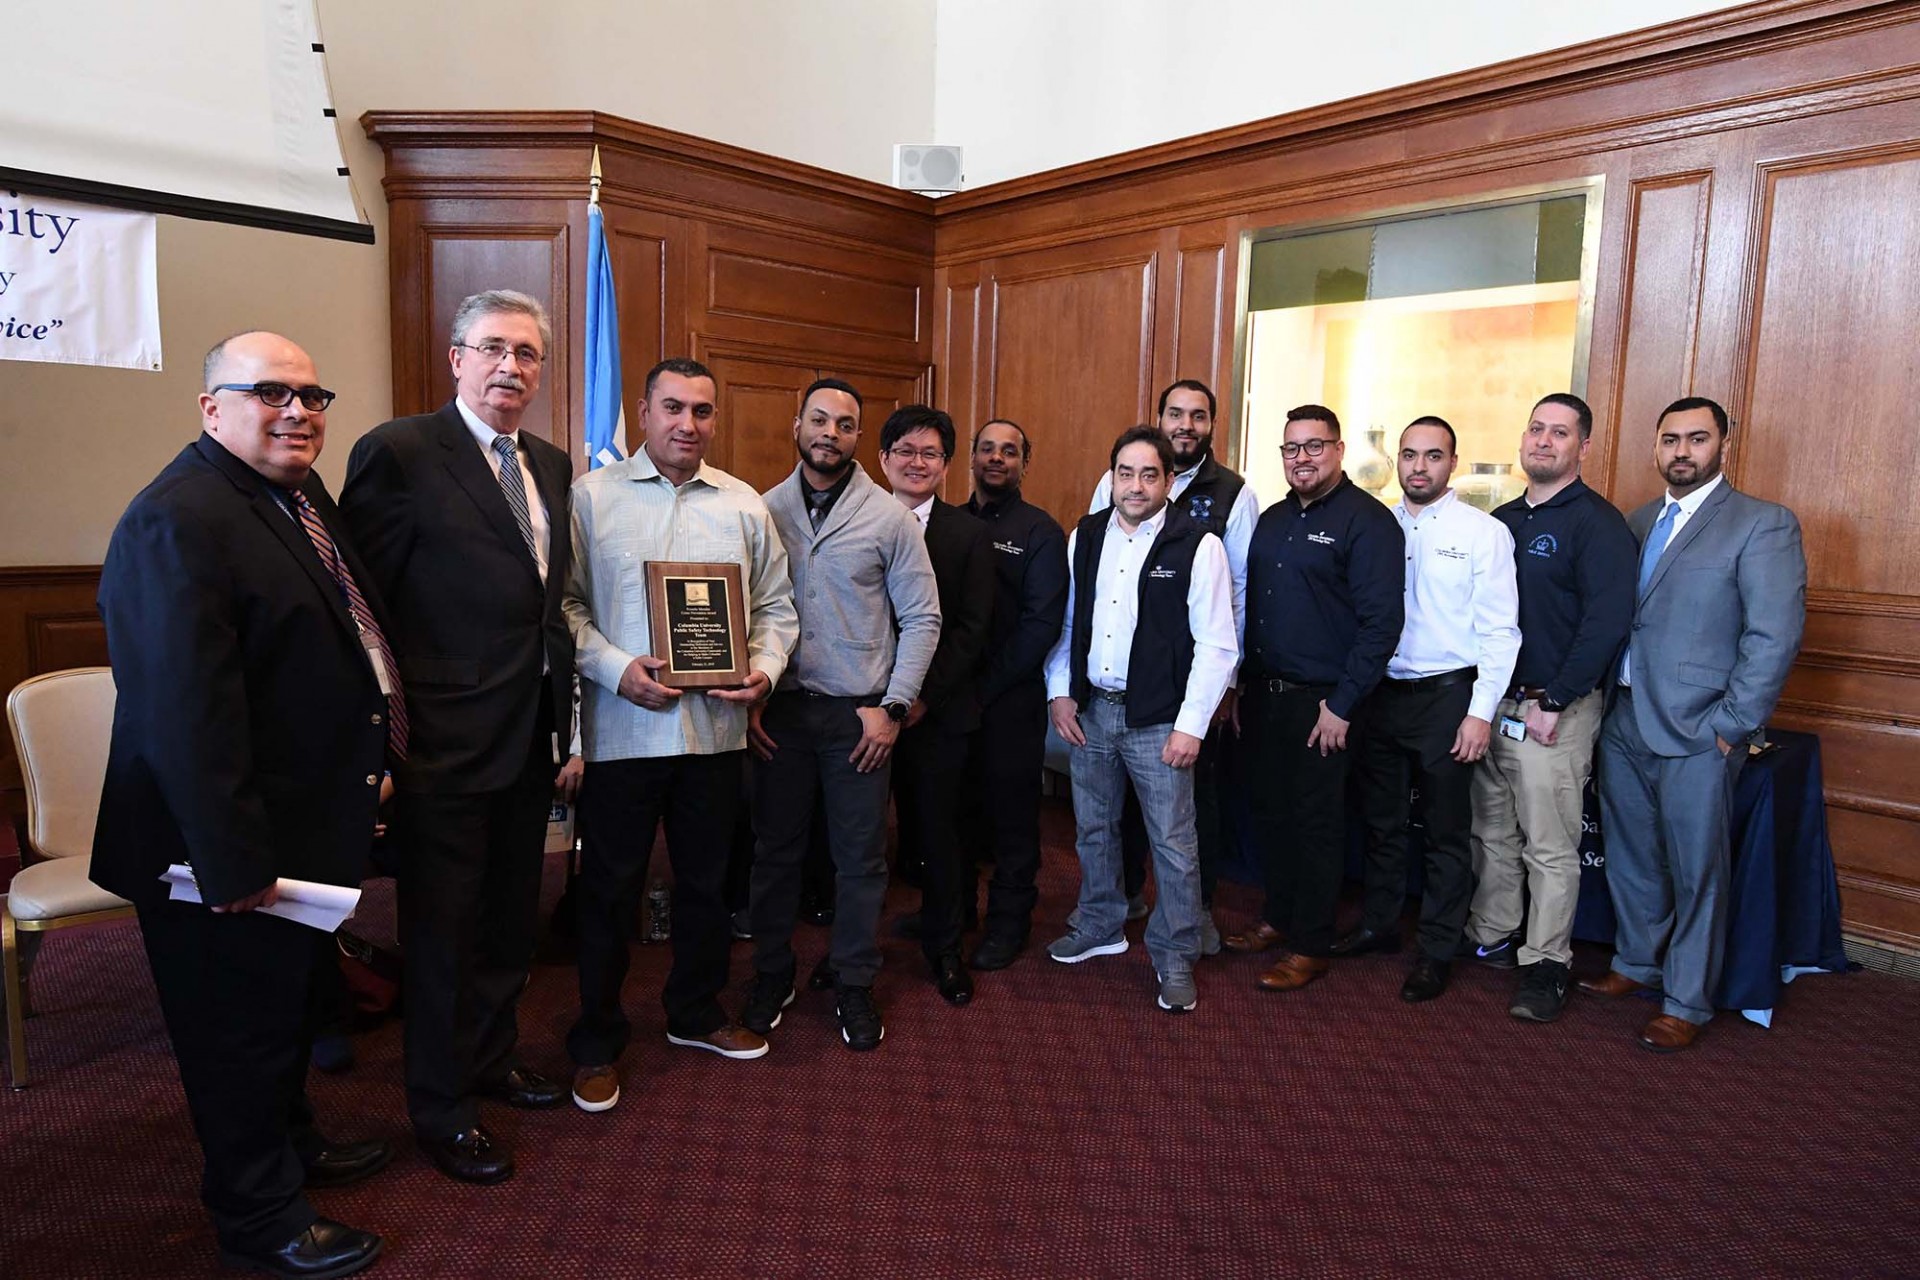 Technology team accepts Crime Prevention Award